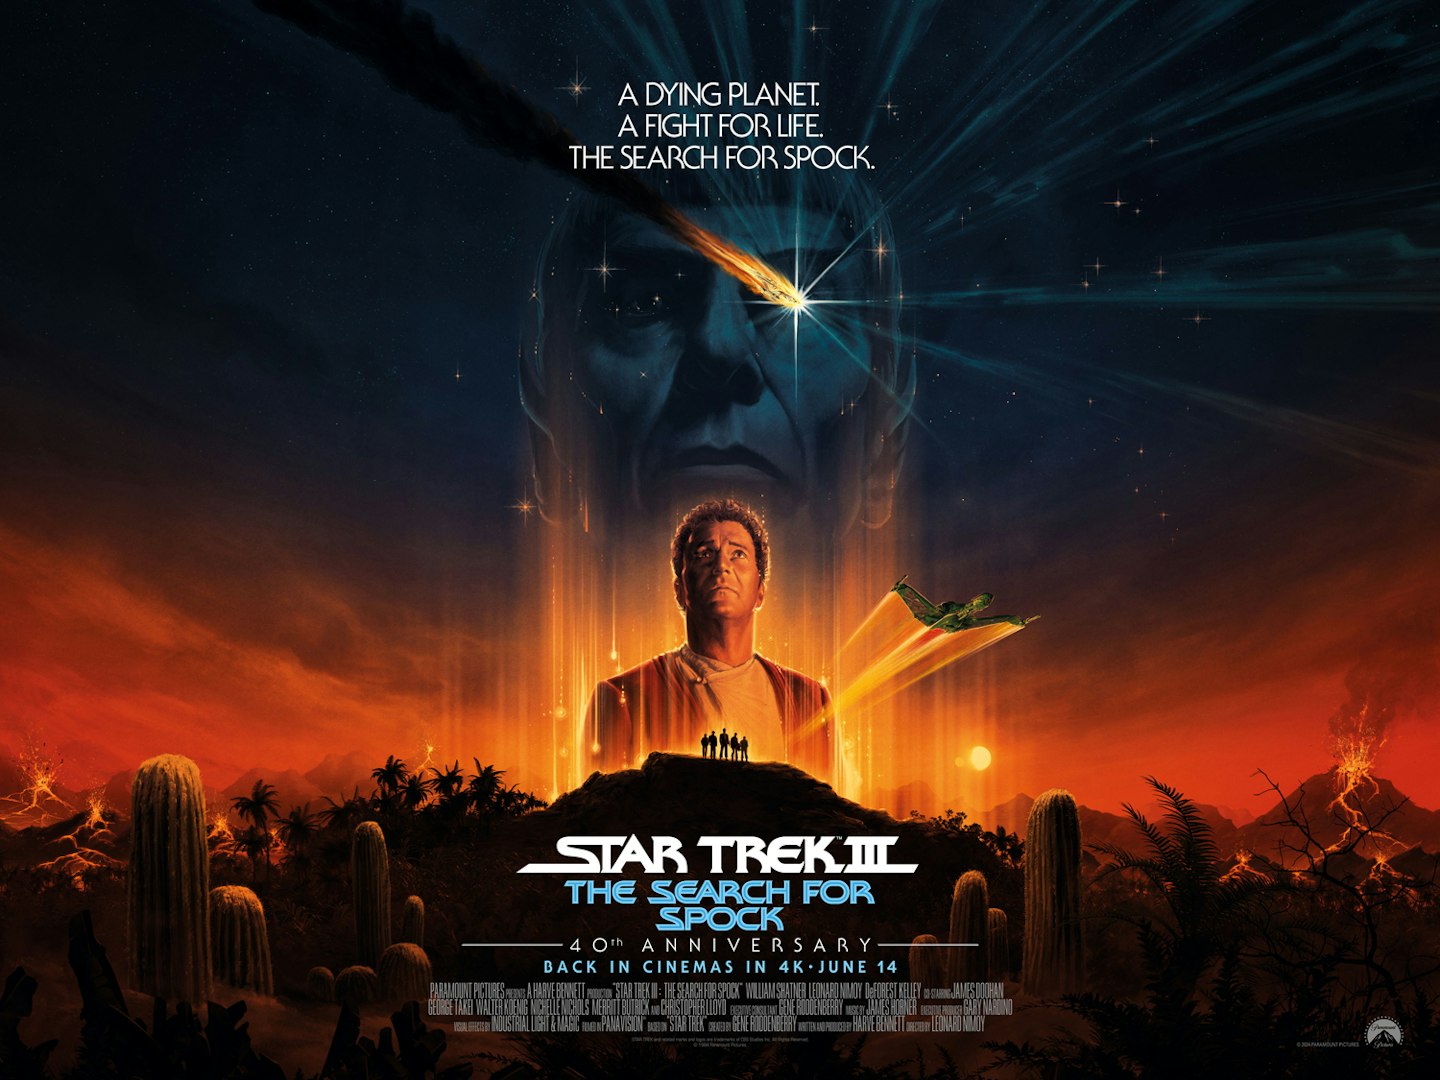 Star Trek III: The Search For Spock – poster quad